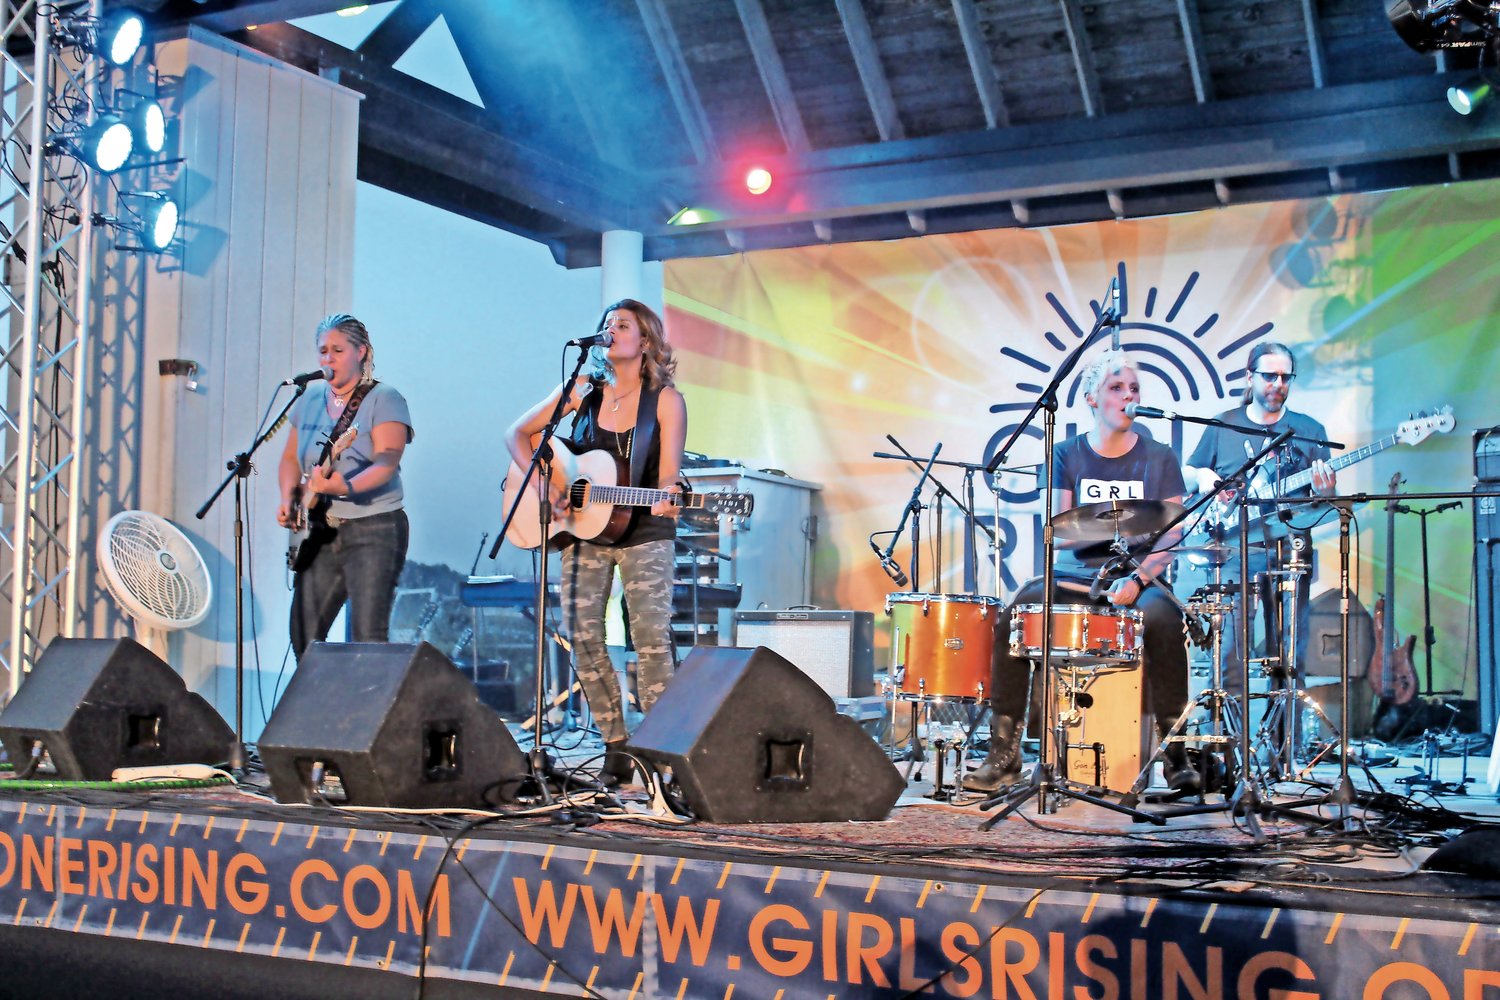 Antigone Rising closed out its music festival last summer at Sea Cliff Beach. The event will take place this summer at Morgan Memorial Park.